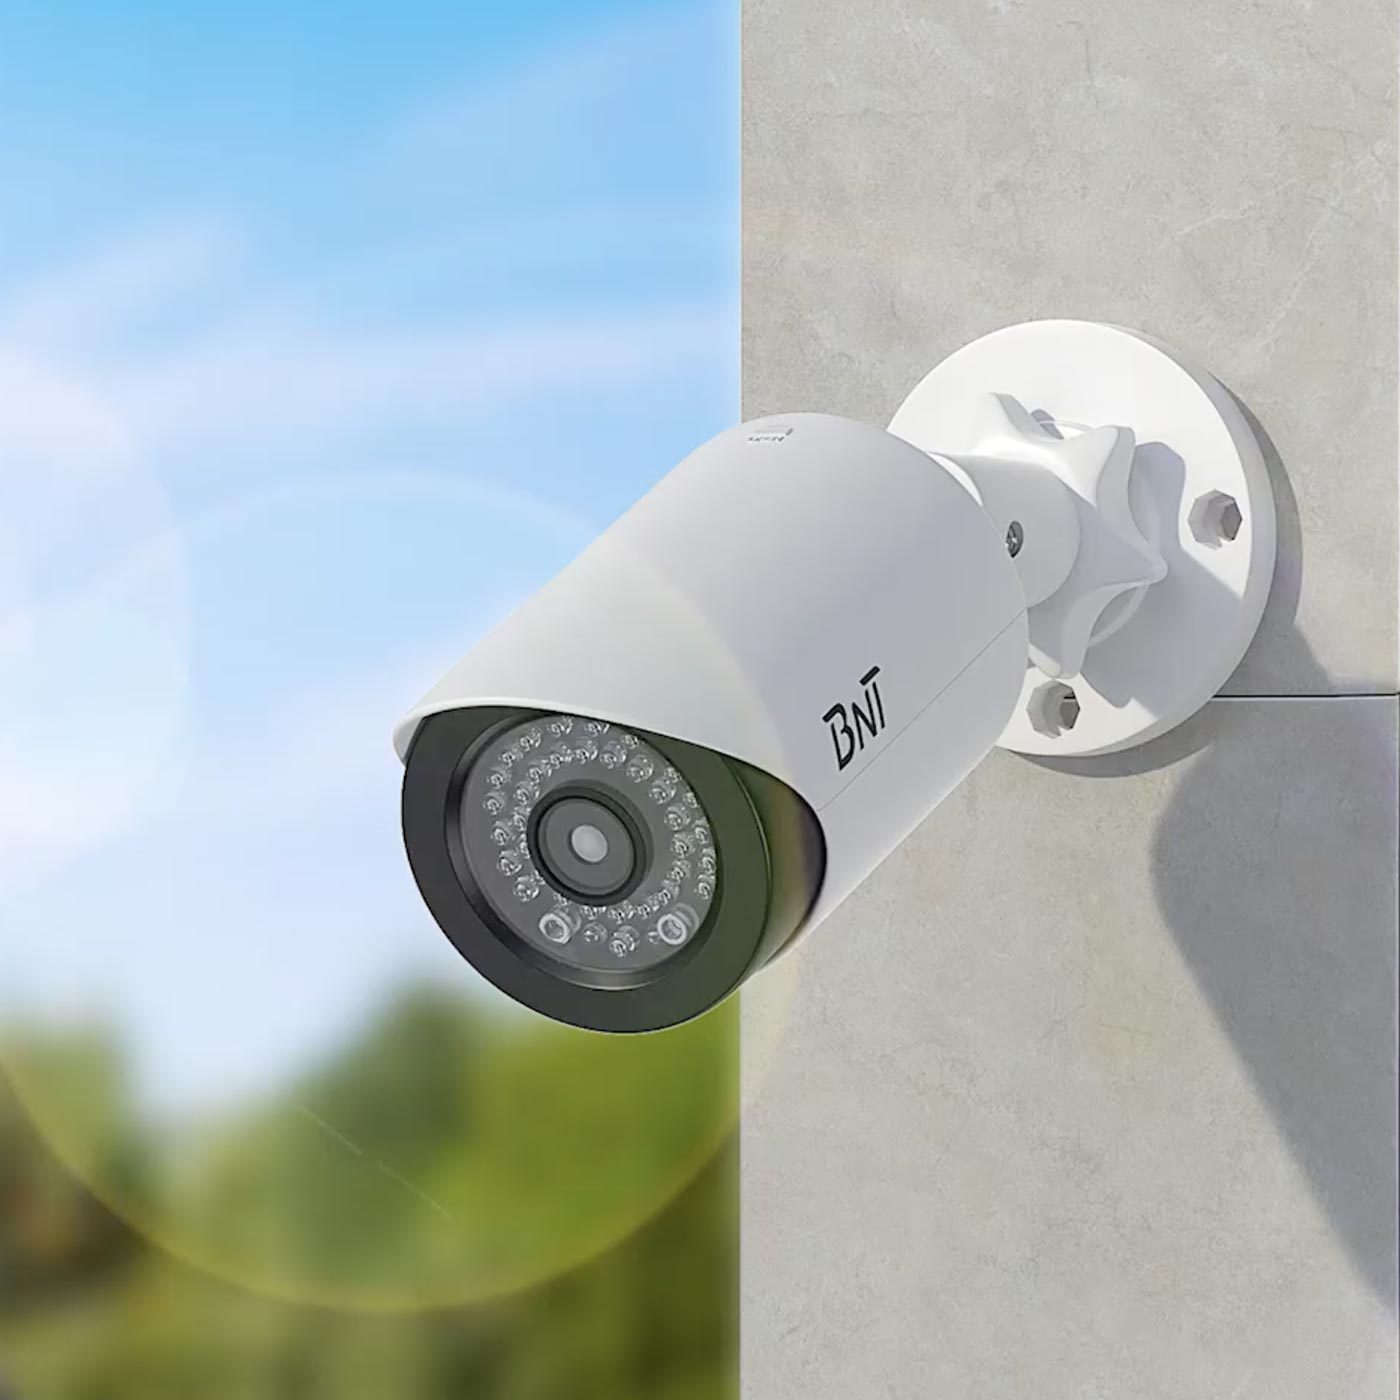 10 Best Fake Security Cameras to Fool Would-Be Thieves